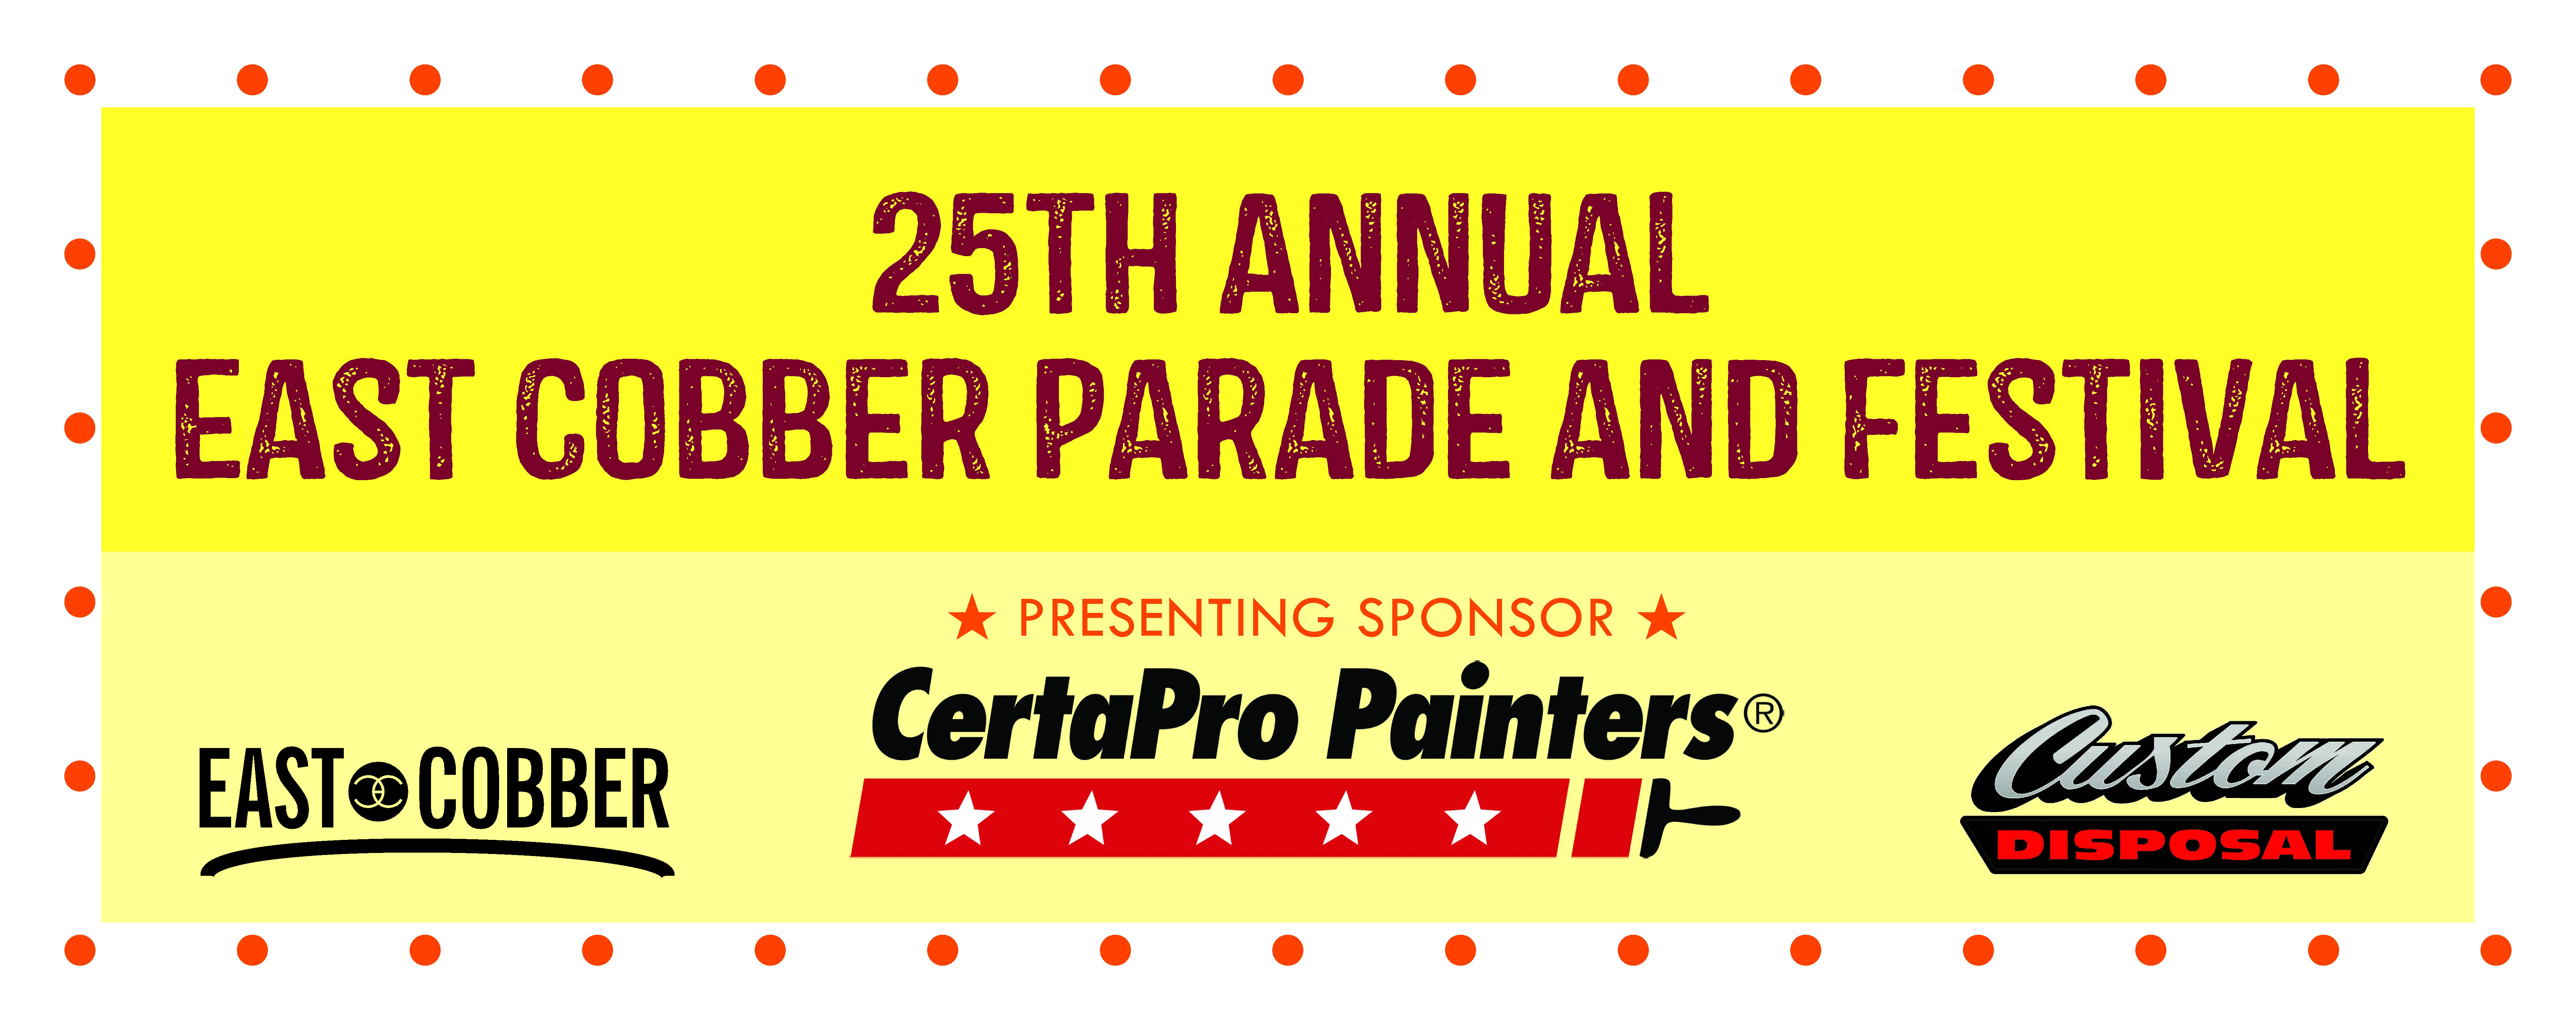 EAST COBBER PARADE AND FESTIVAL IS TOMORROW SEPTEMBER 9TH